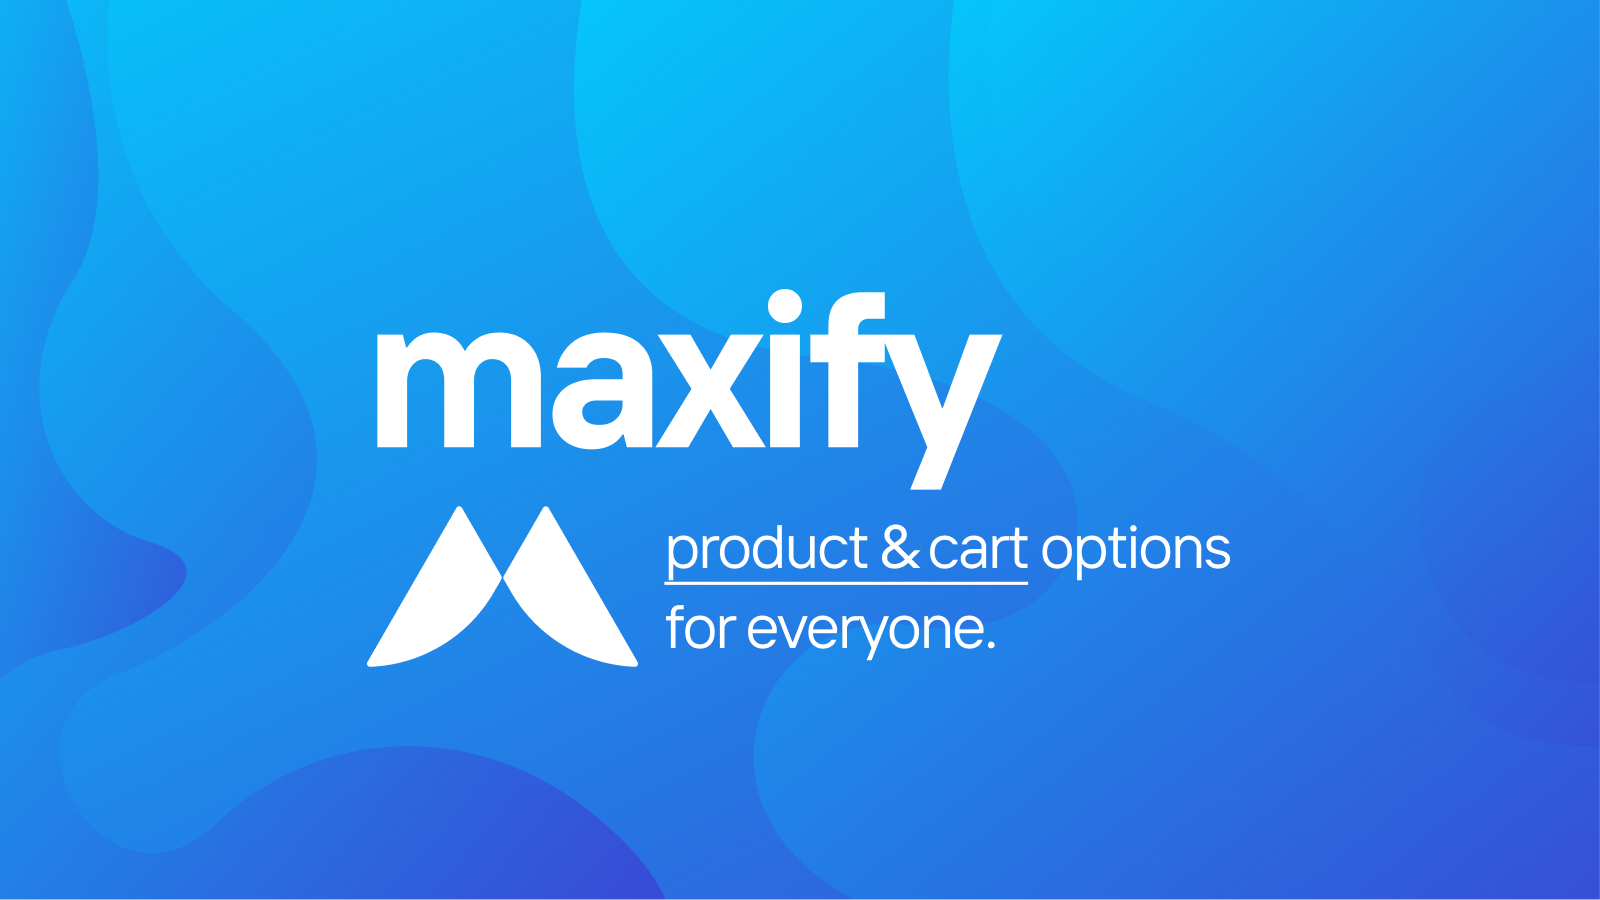 Maxify product and cart options